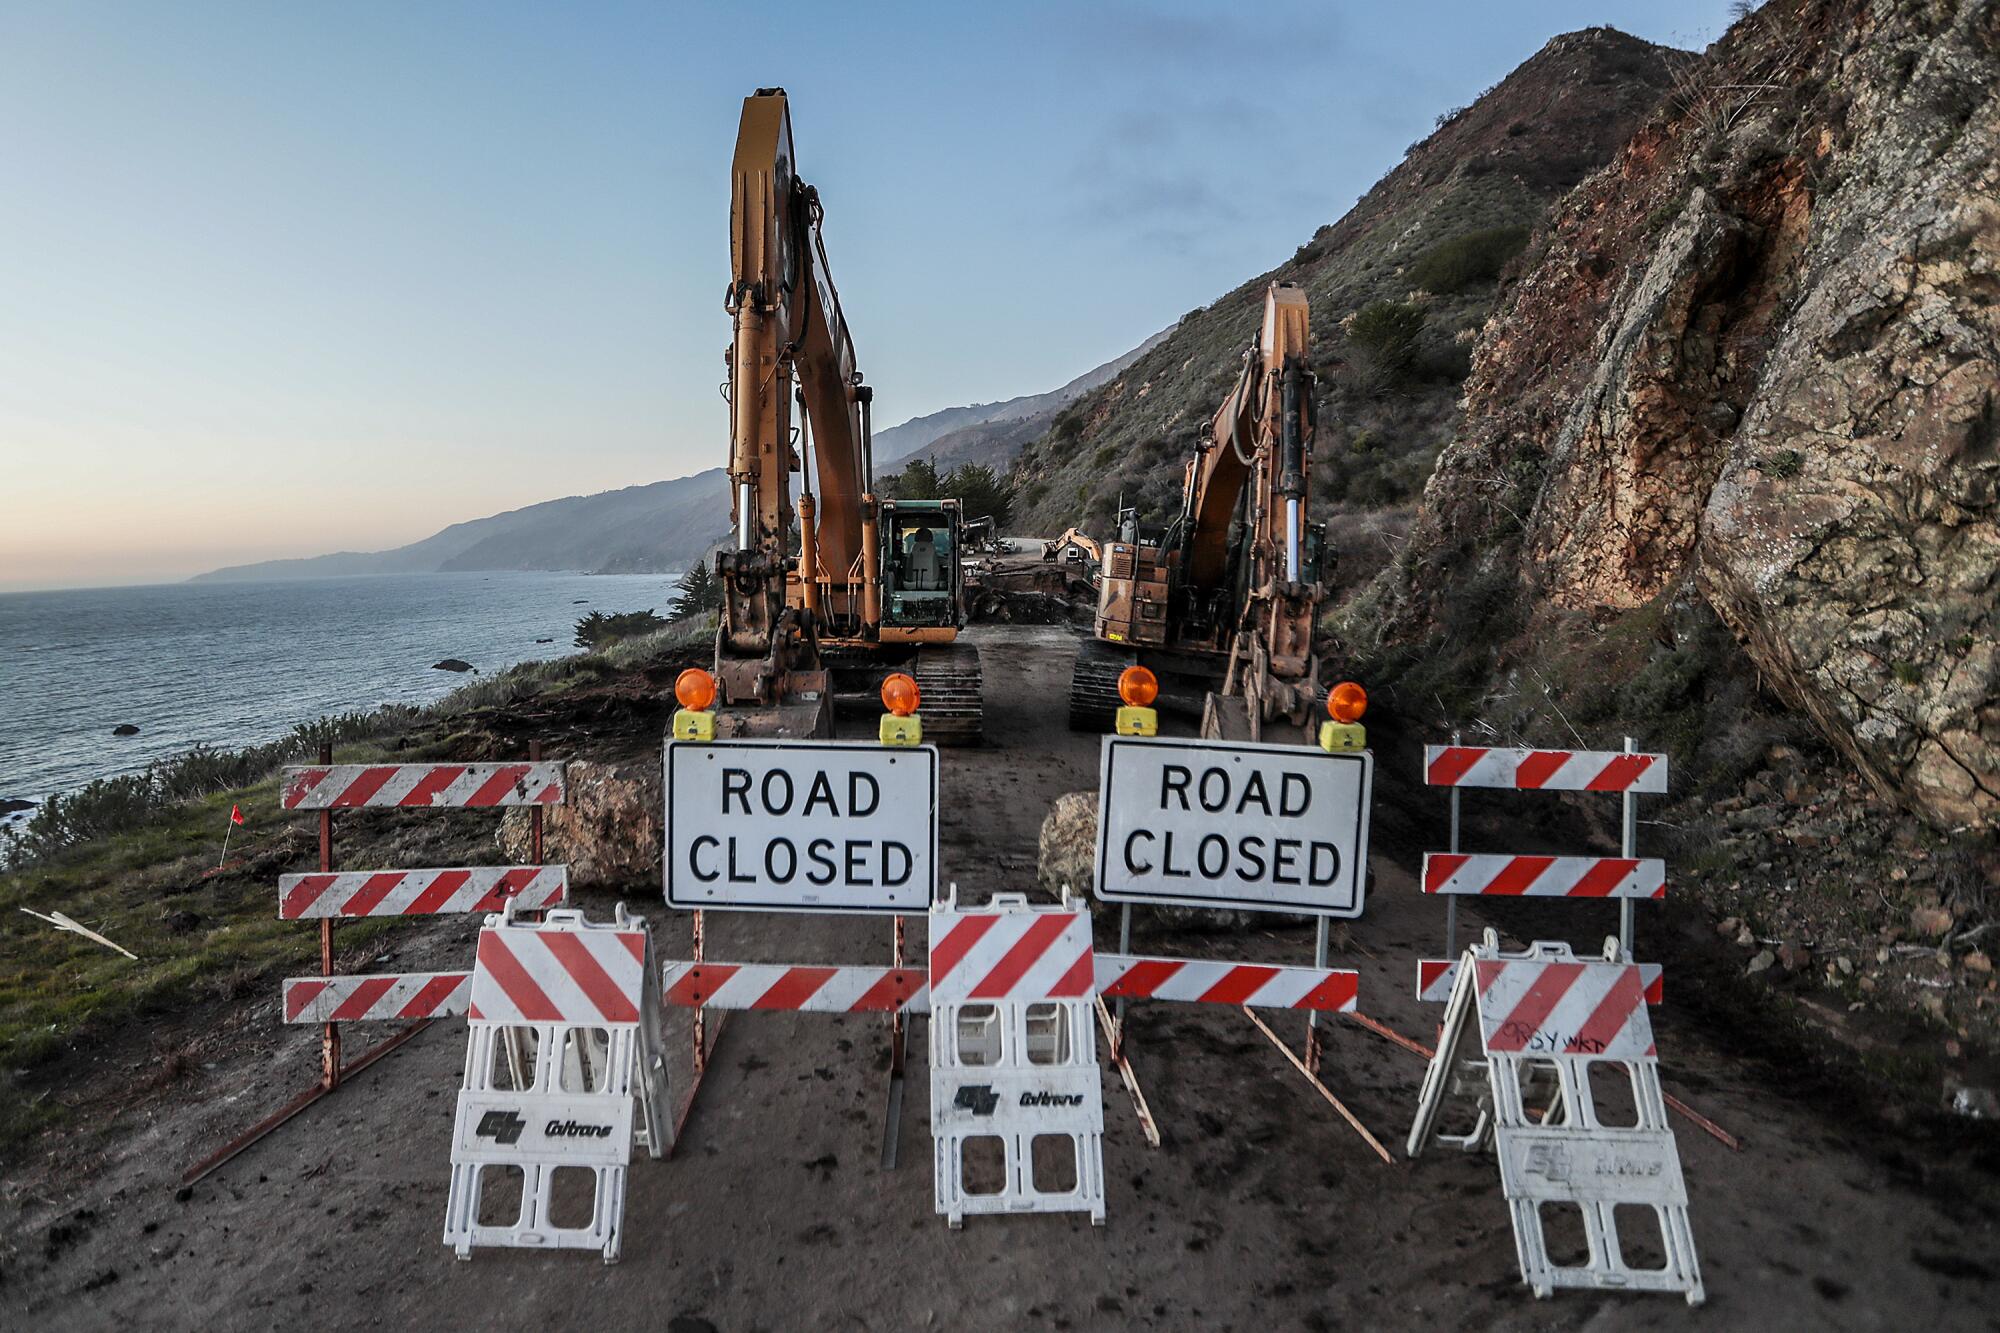 Two "Road Closed" signs in front on heavy road equipment.